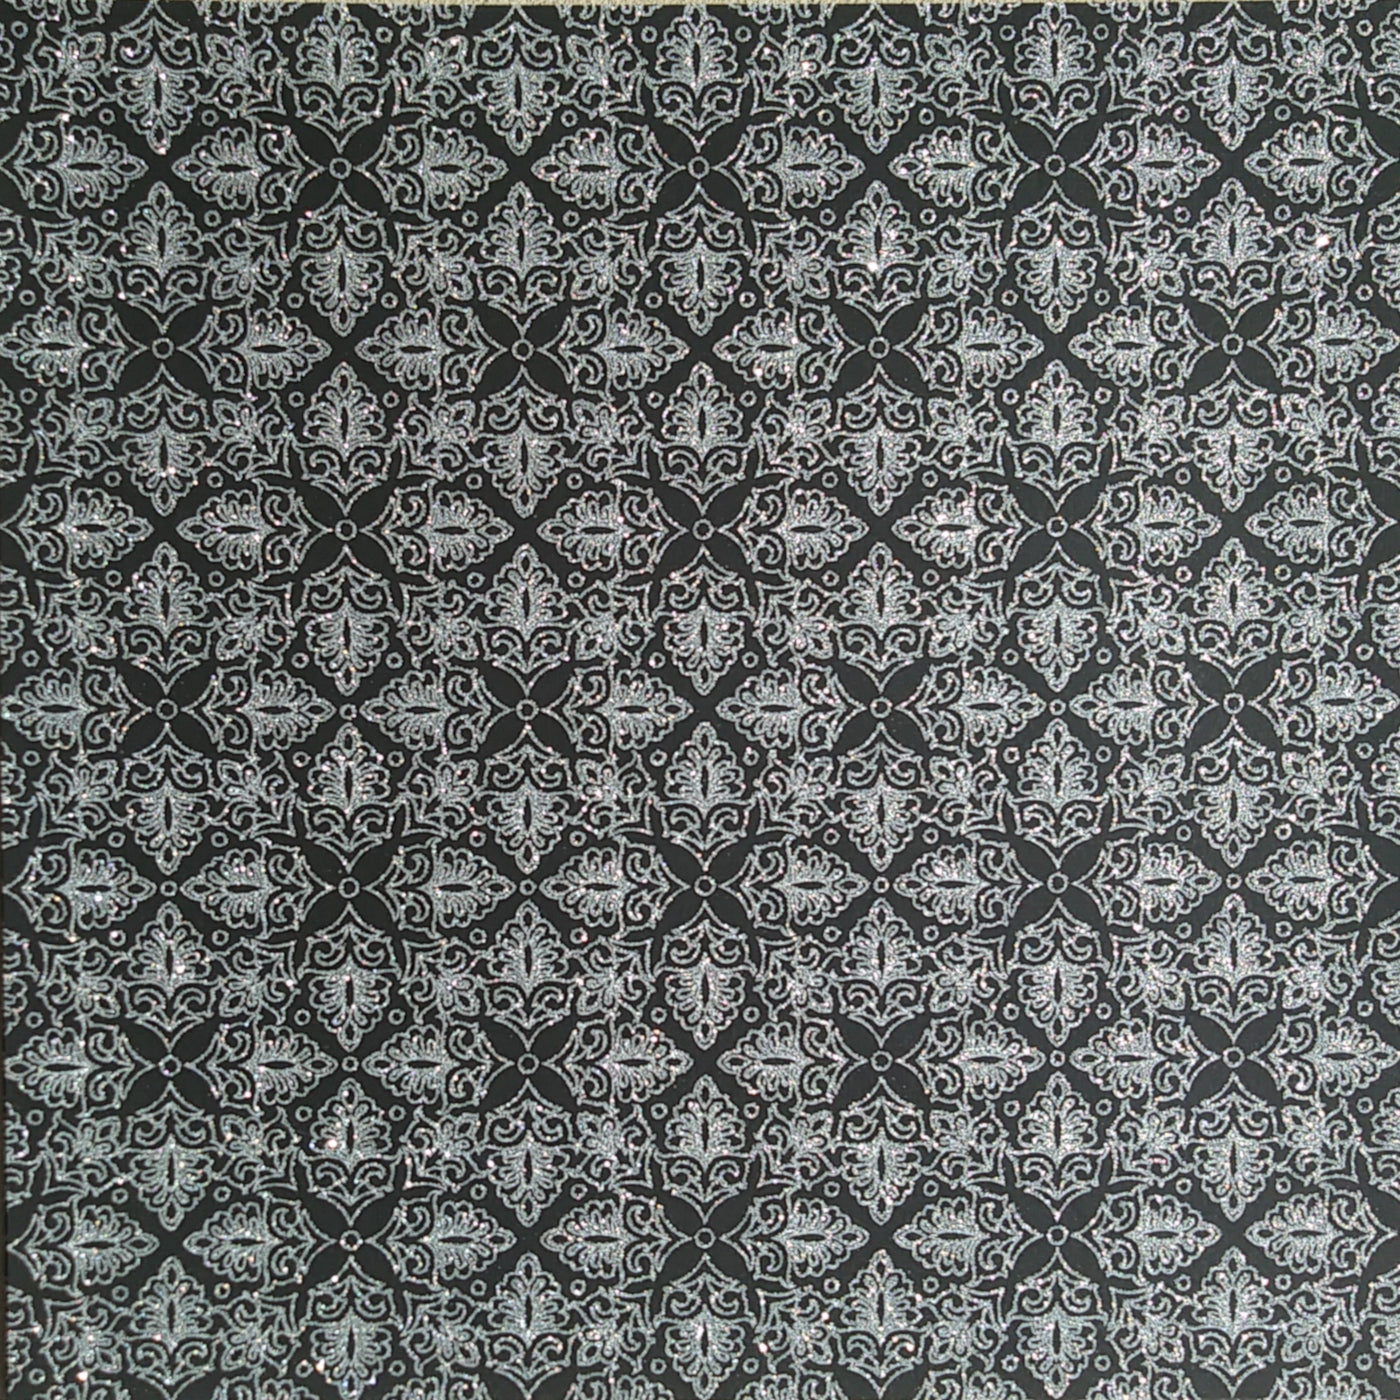 12x12 cardstock with intricate ornamental pattern on black background - DCWV